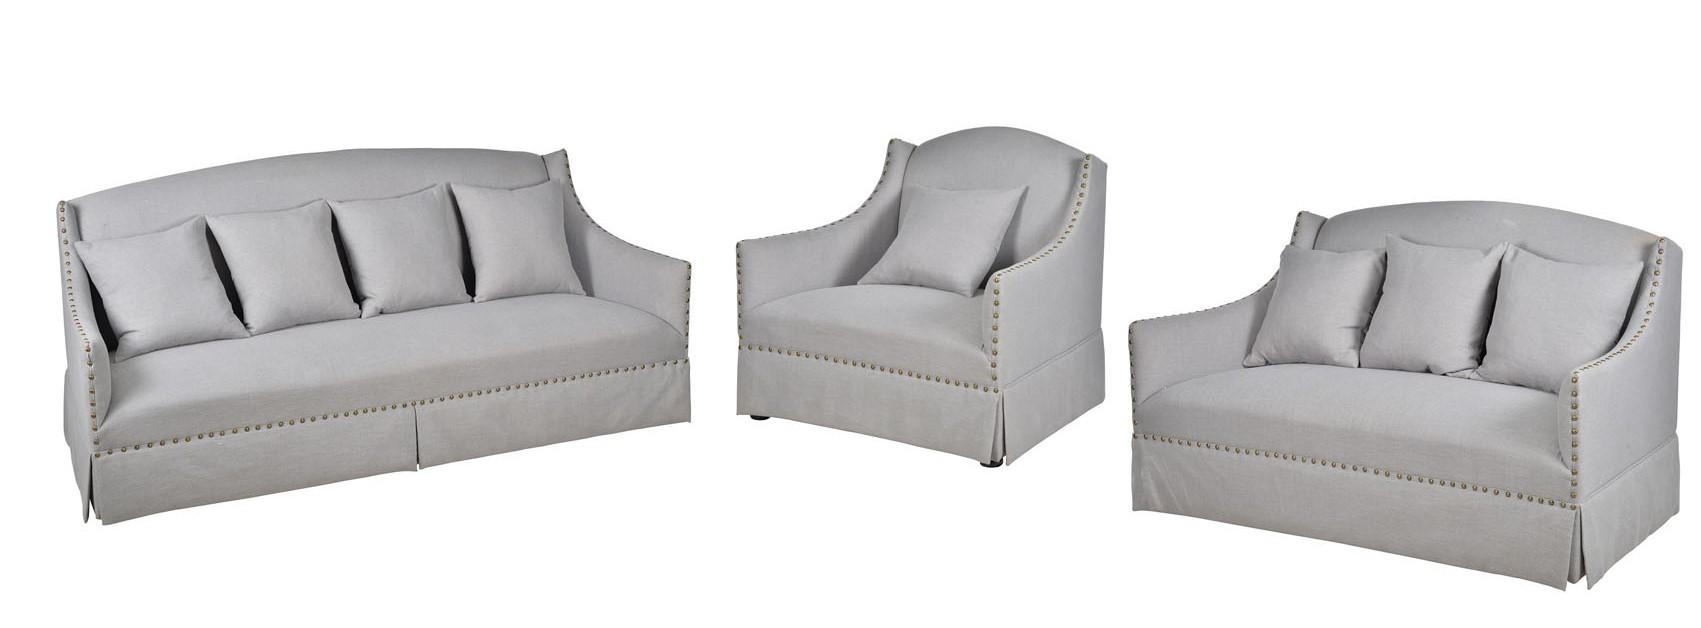 A&B Home Pampa Sofa Loveseat and Chair Set